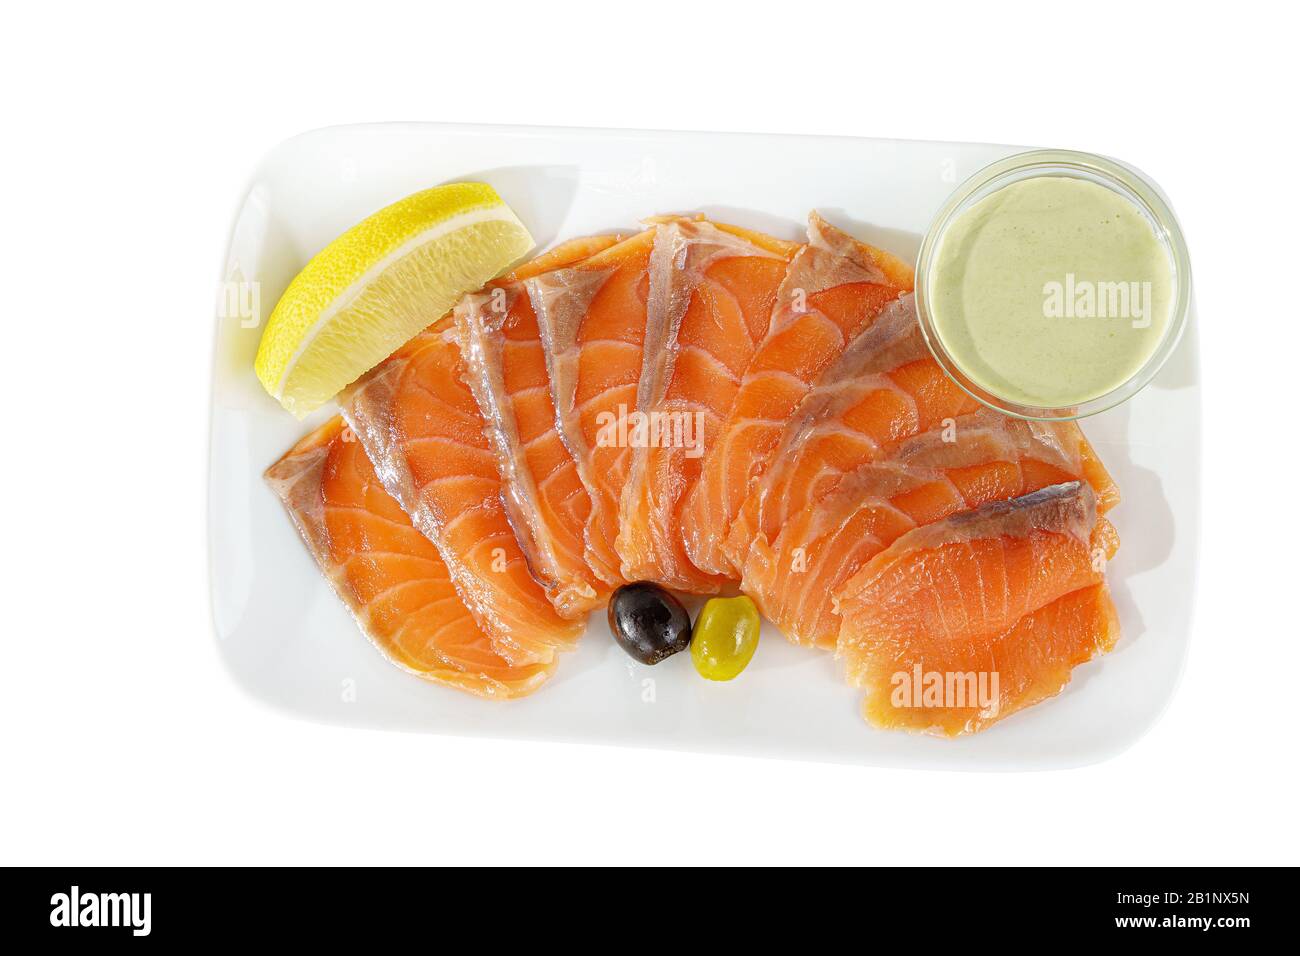 https://c8.alamy.com/comp/2B1NX5N/cold-appetizer-before-alcohol-salmon-fillet-salted-with-sauce-wasabi-9-pieces-mayonnaise-sour-cream-lemon-slice-and-olives-on-square-plate-white-2B1NX5N.jpg